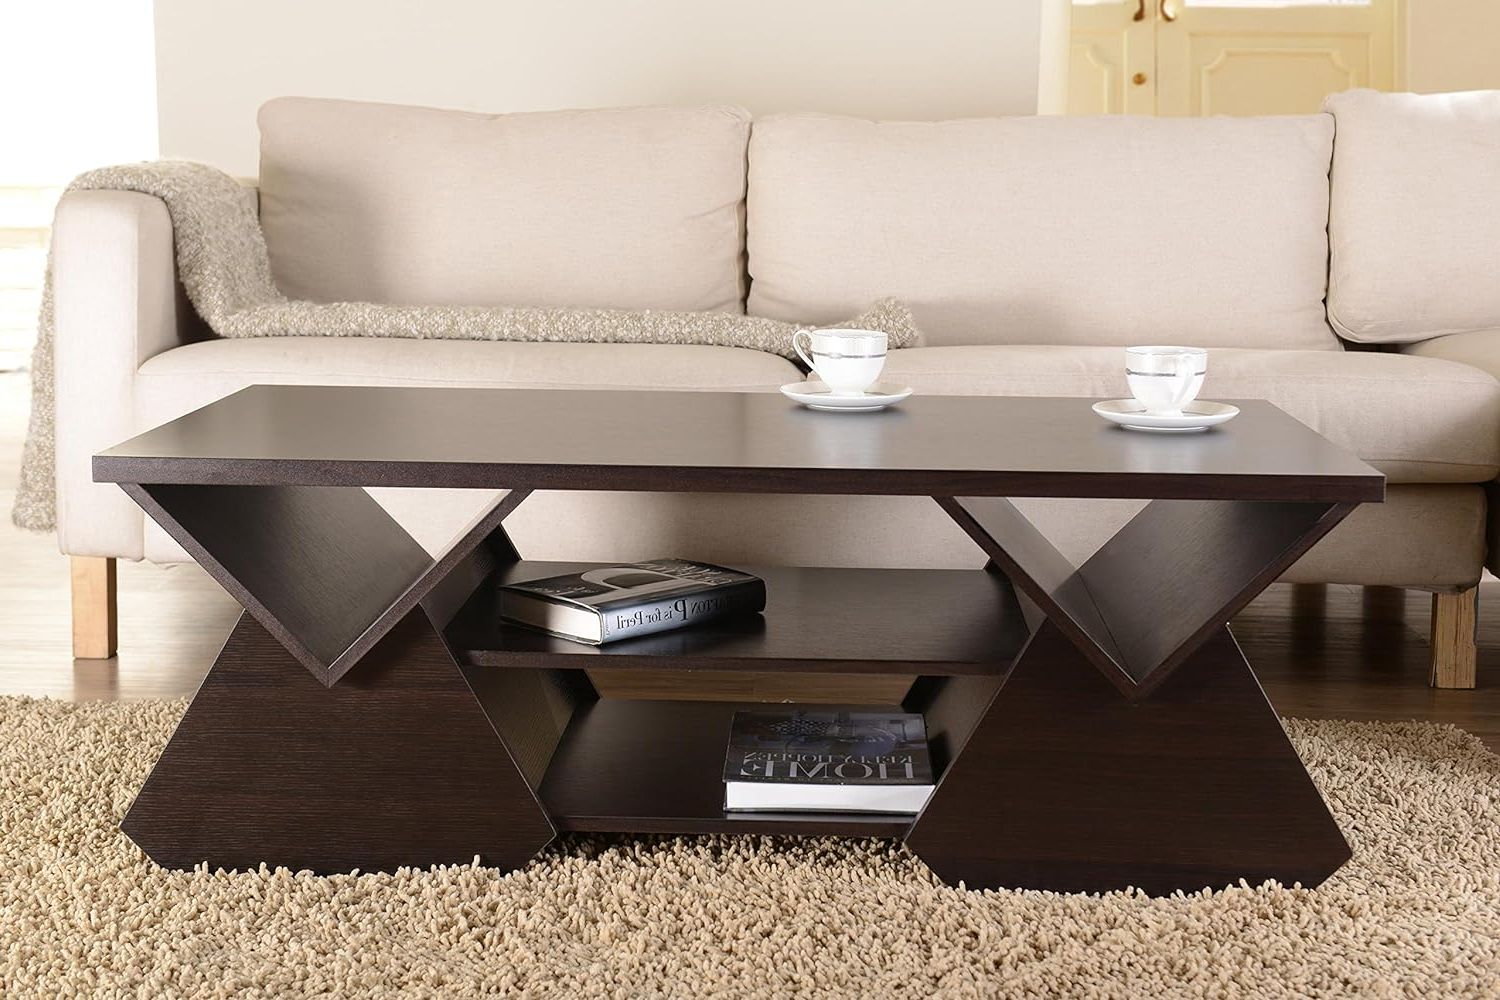 15 Coffee Tables Under $200: Unique, Modern, Cool, Wood, Glass For Recent Modern Wooden X Design Coffee Tables (View 14 of 15)